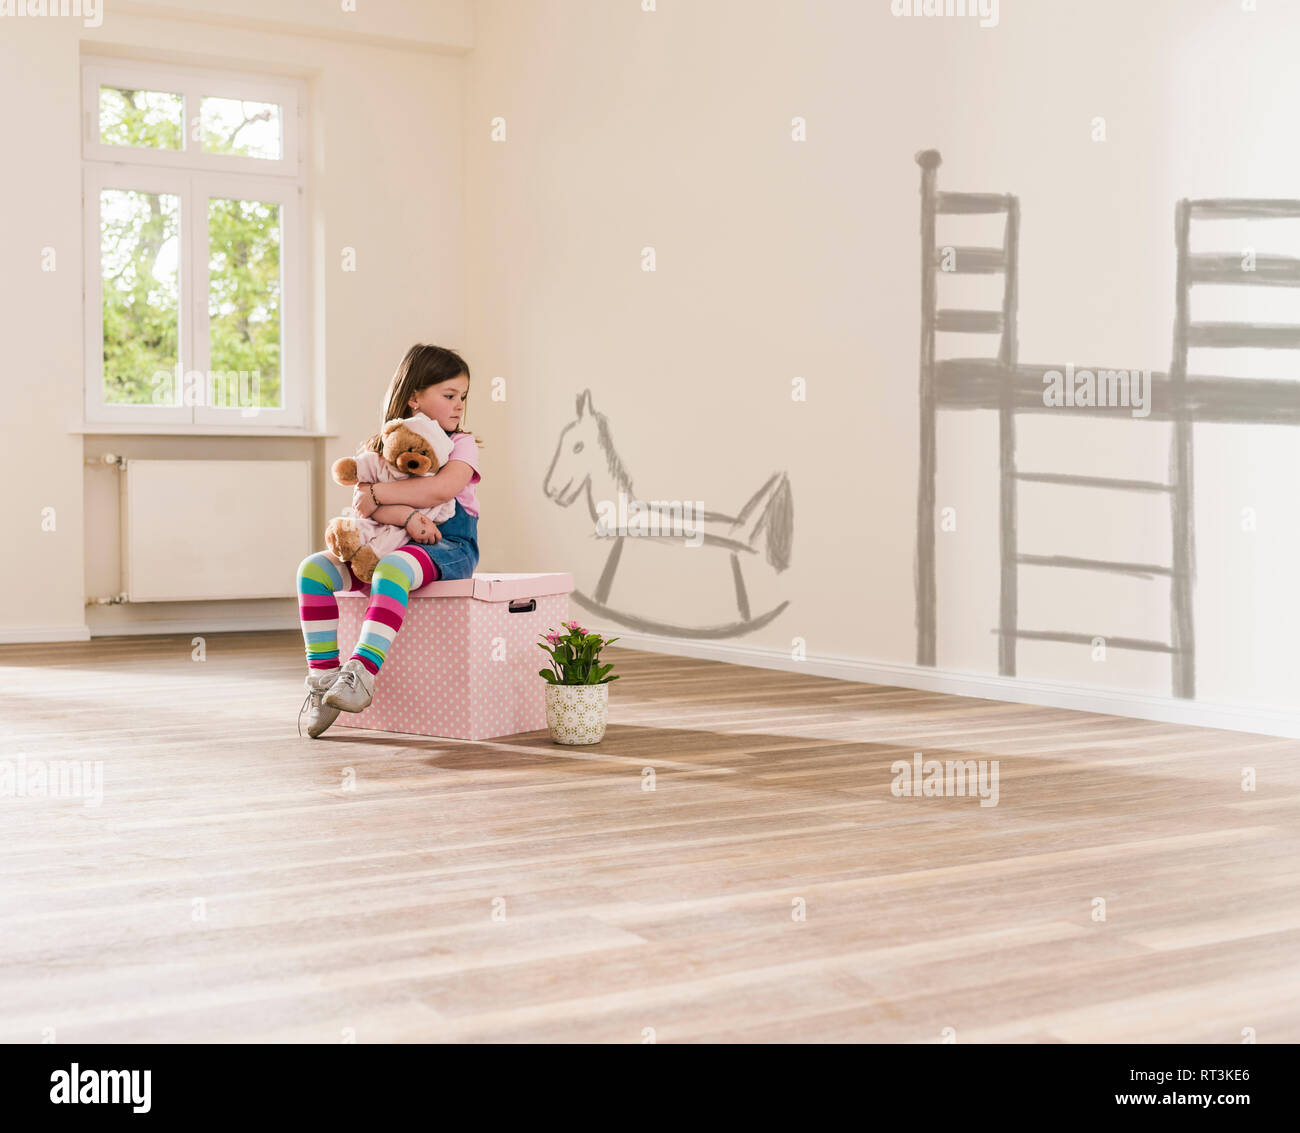 Girl in empty apartment sitting on a box holding teddy Stock Photo